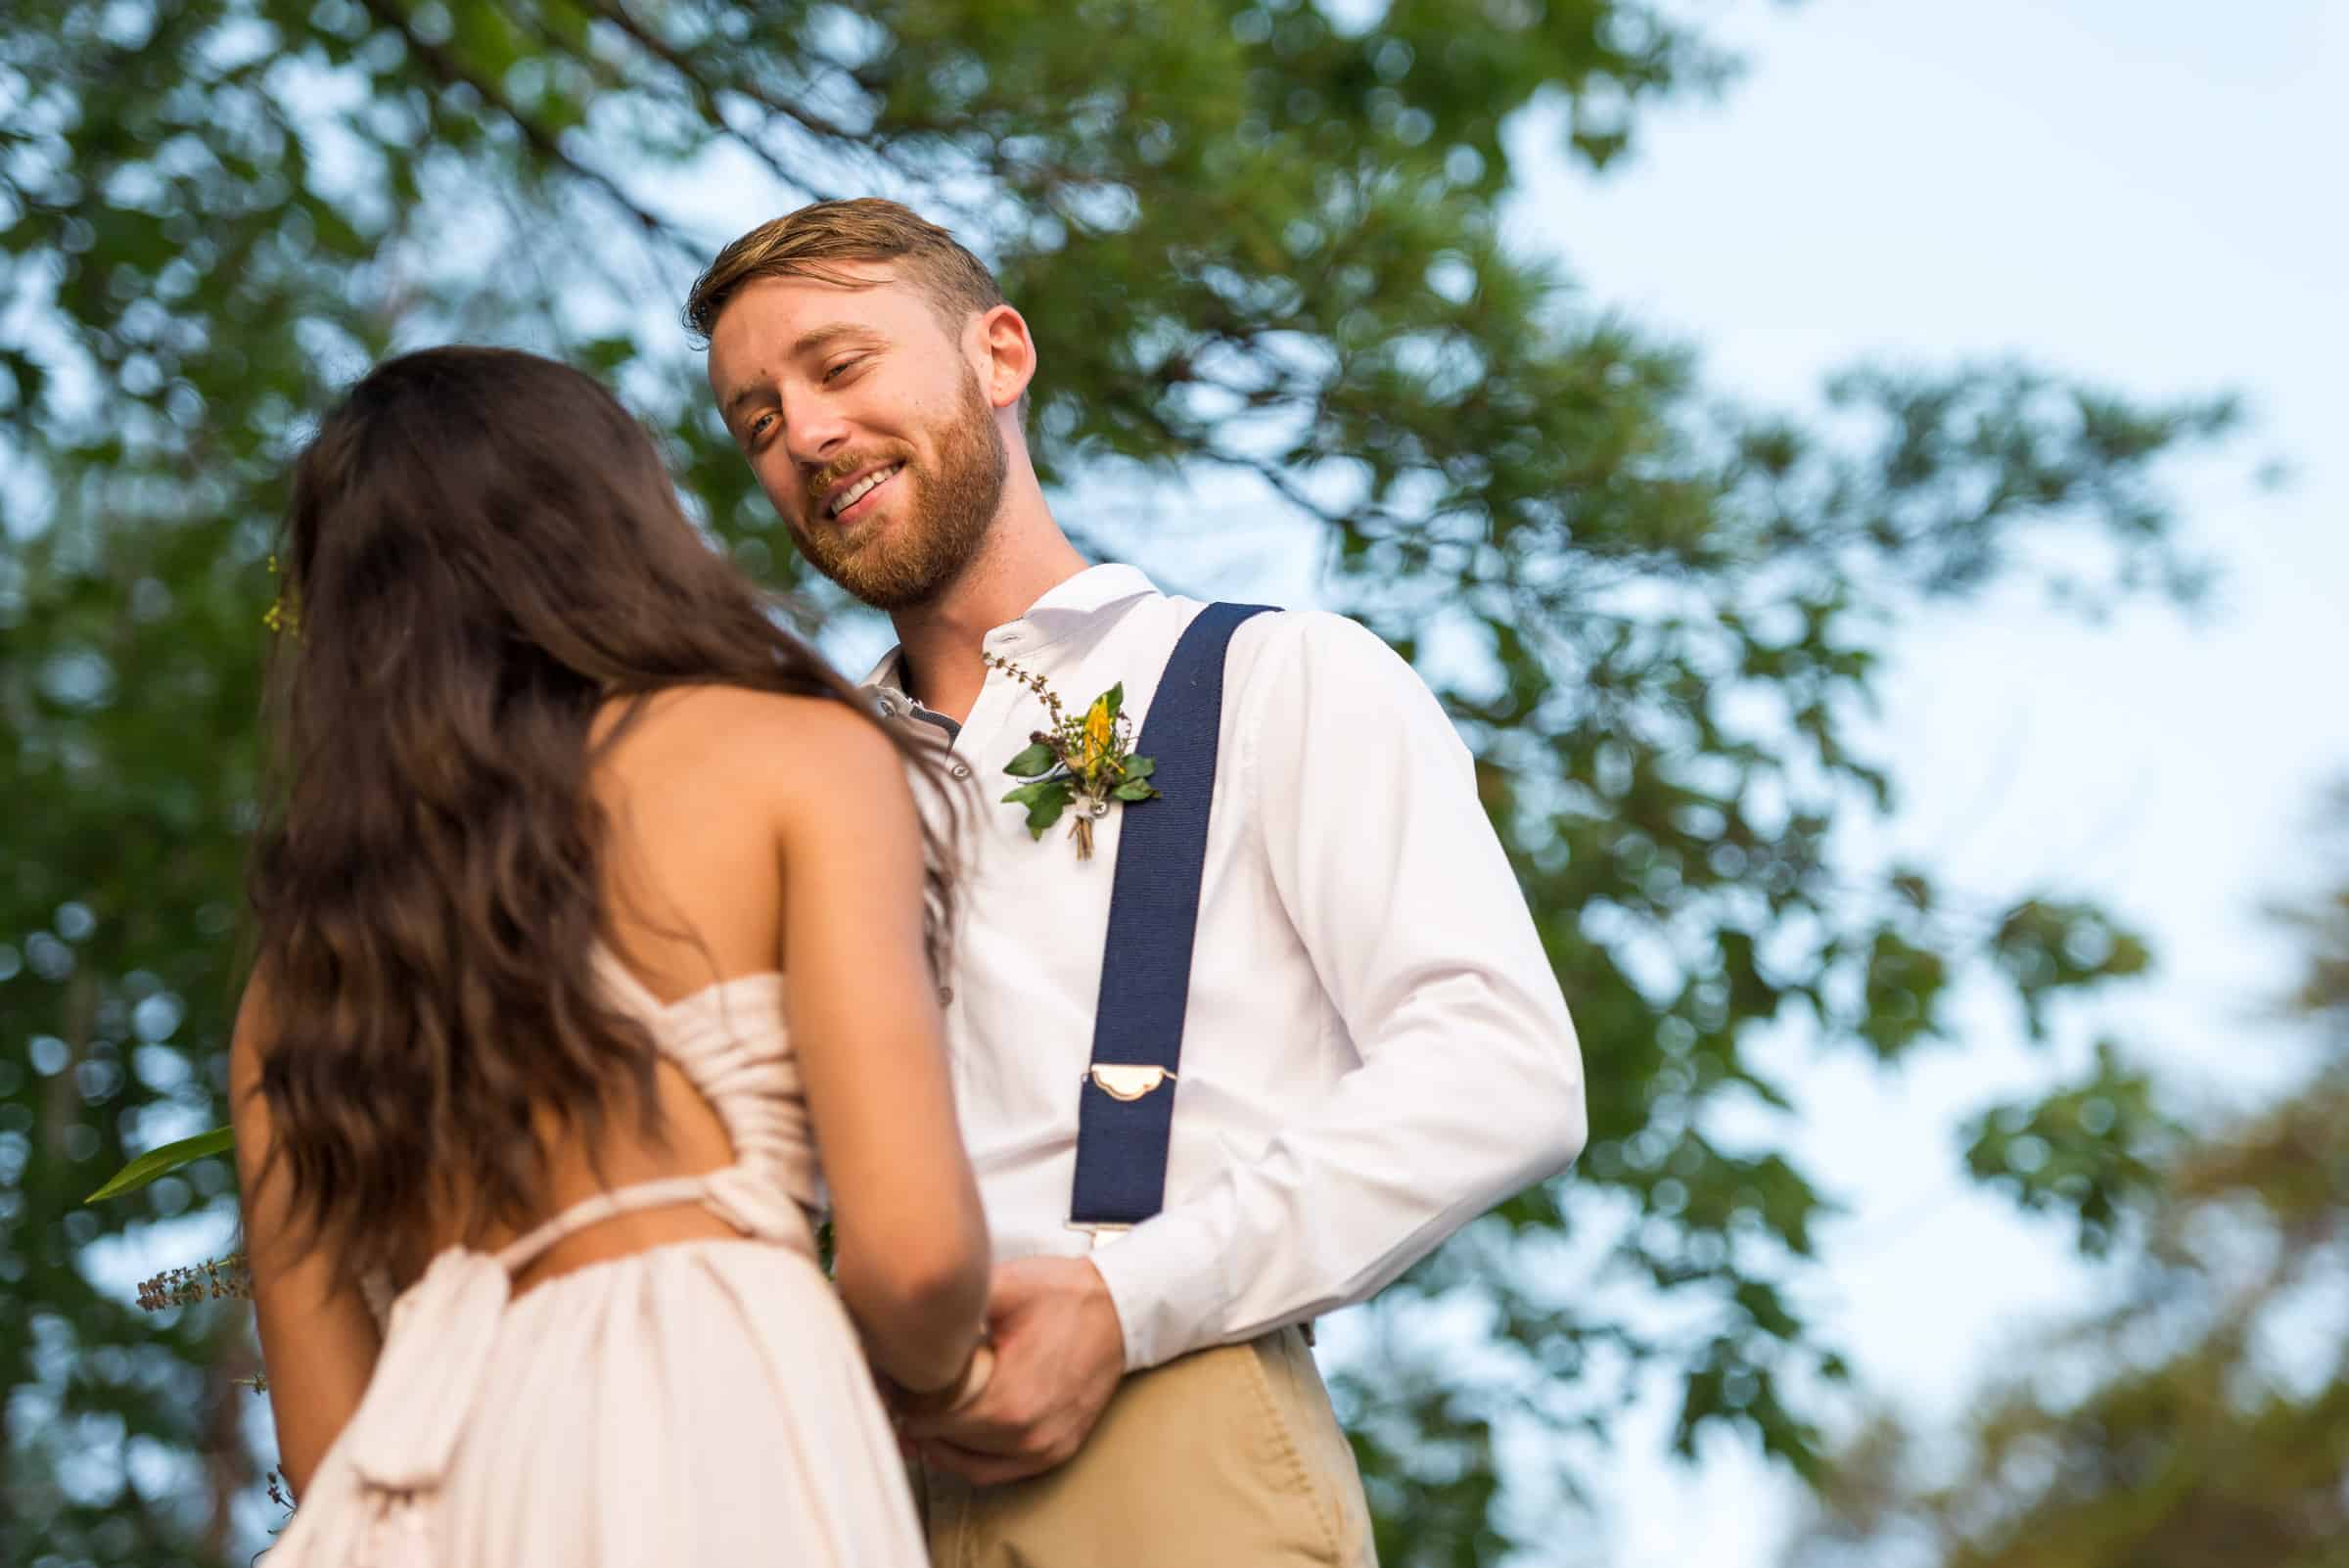 Groom looks down at bride, holding her hands and smiling. 